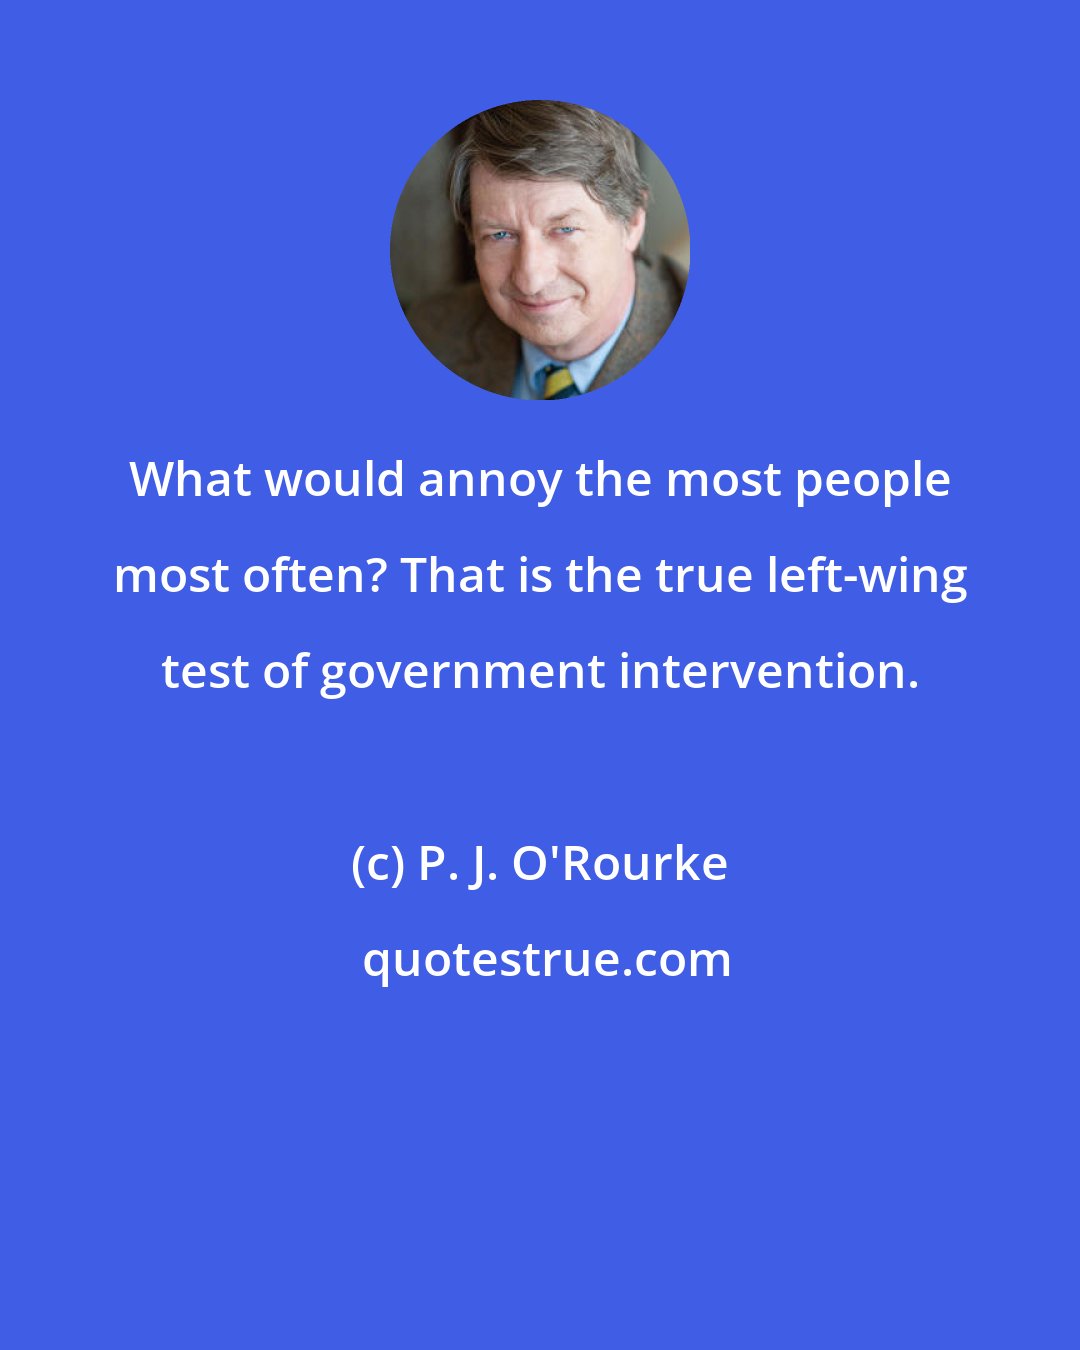 P. J. O'Rourke: What would annoy the most people most often? That is the true left-wing test of government intervention.